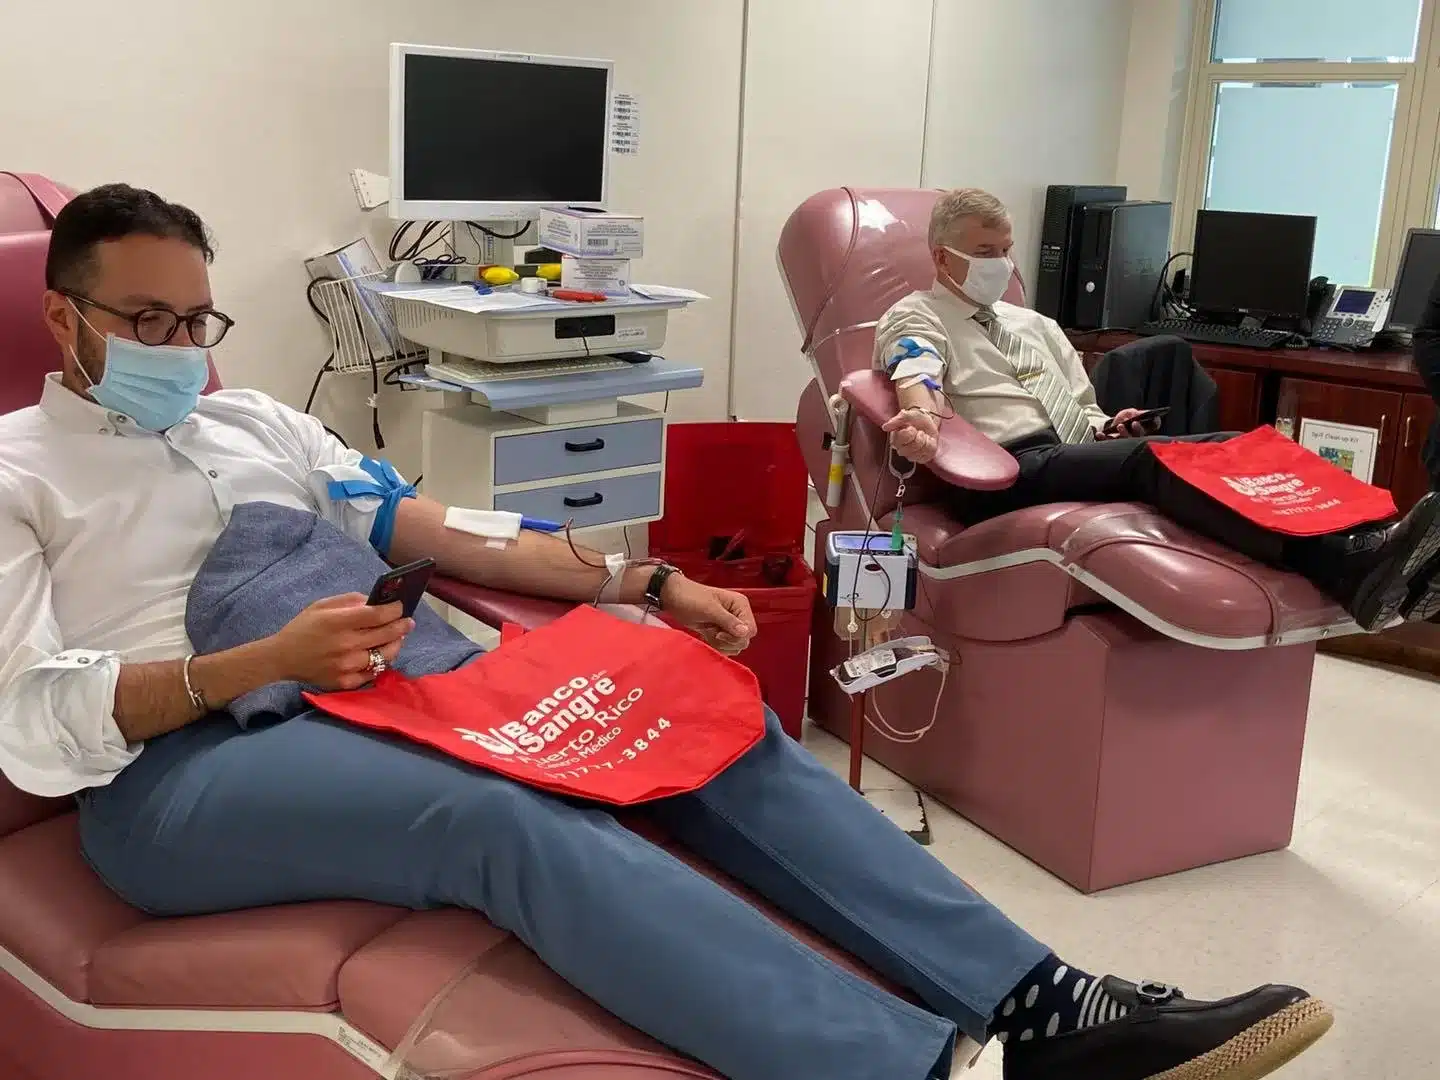 Blood donations are now more LGBTQ inclusive. How will that affect the US territories?